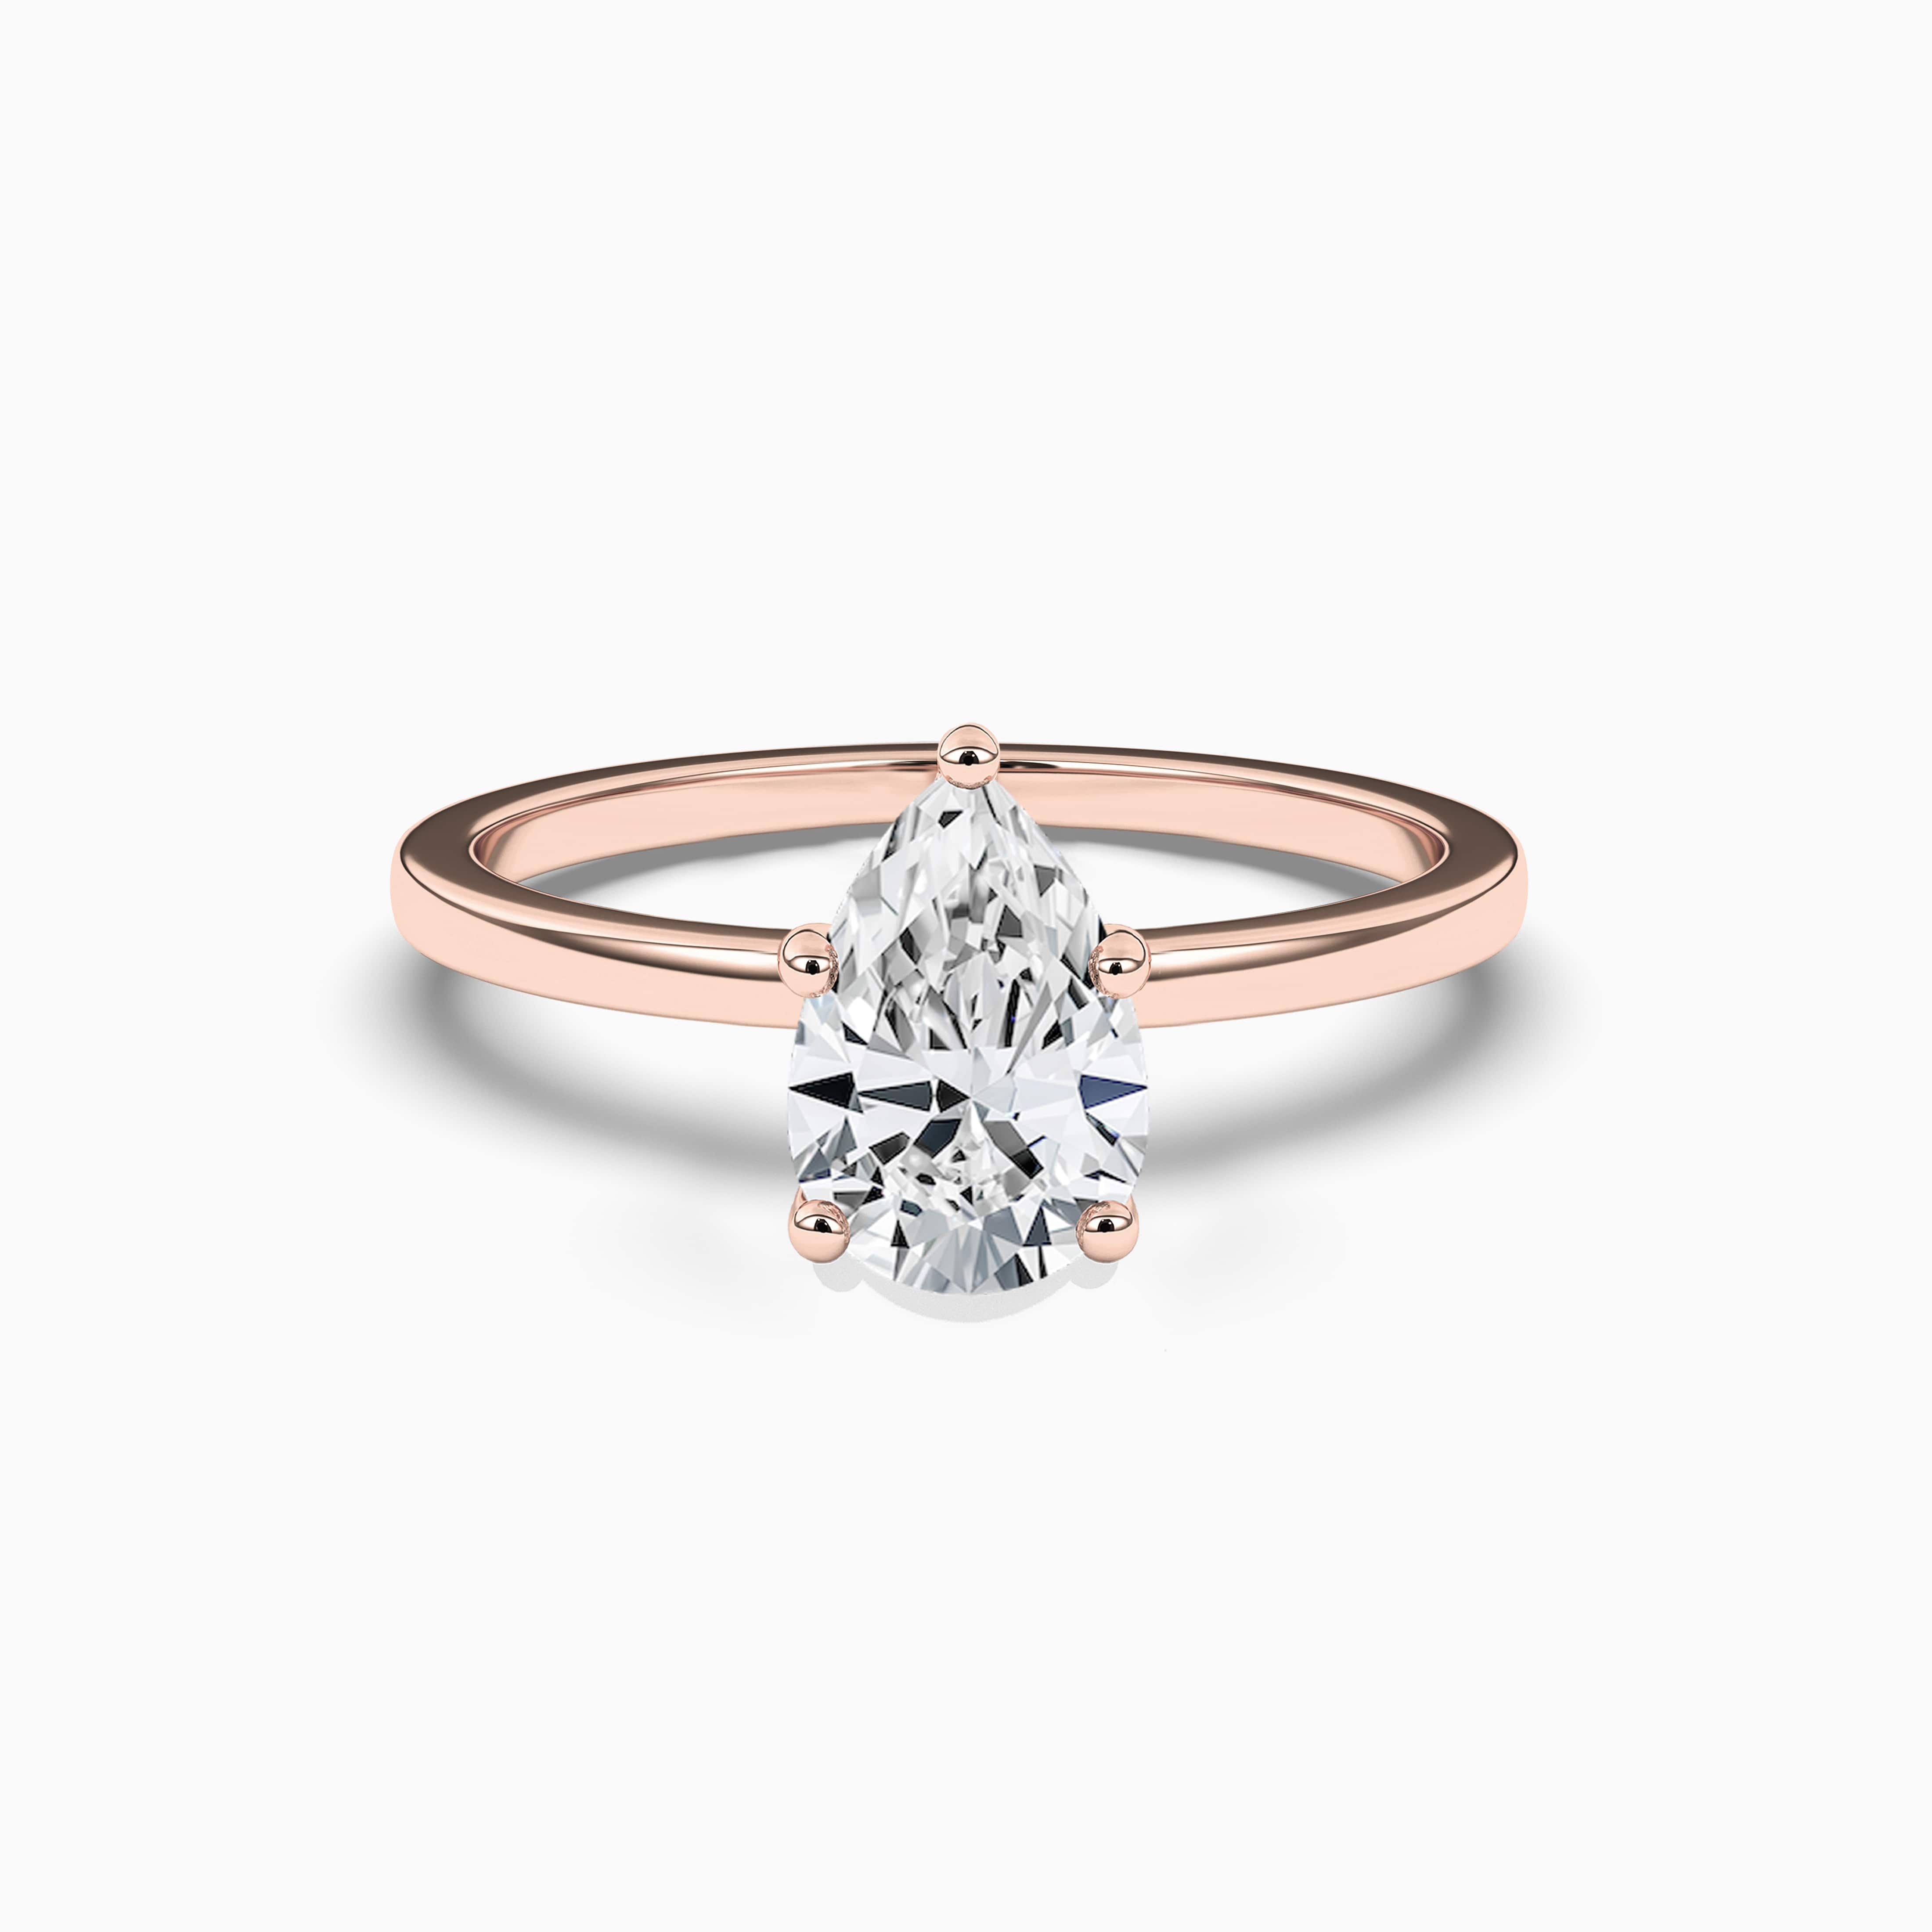 2ct pear shaped engagement ring